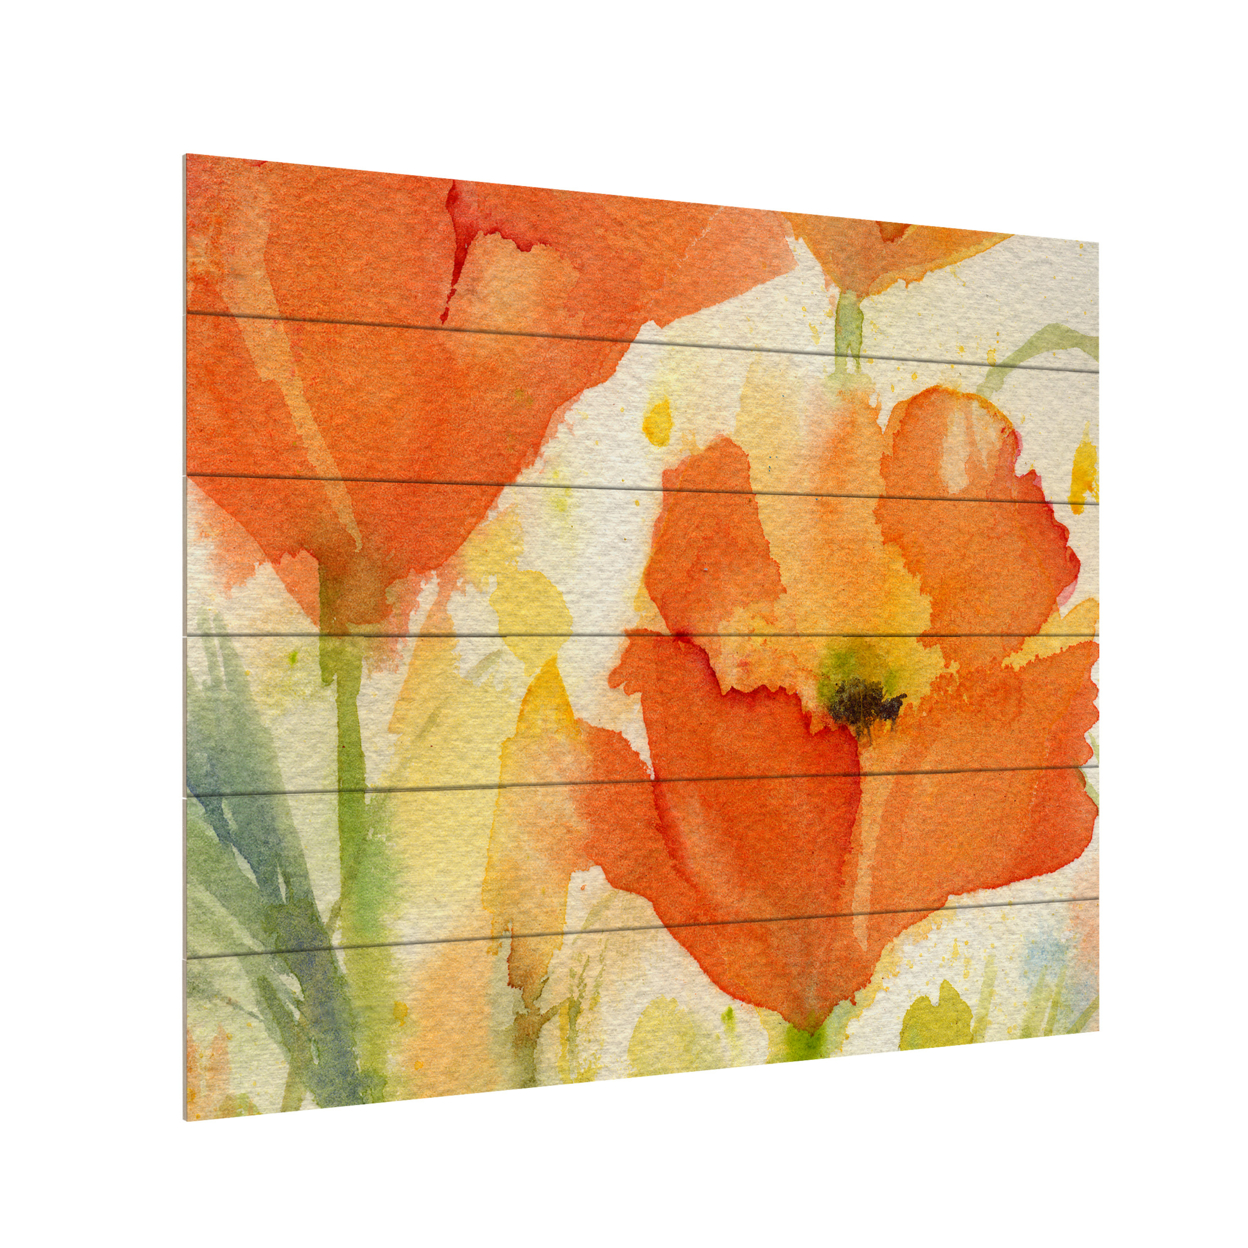 Wooden Slat Art 18 X 22 Inches Titled Field Of Poppies Golden Ready To Hang Home Decor Picture